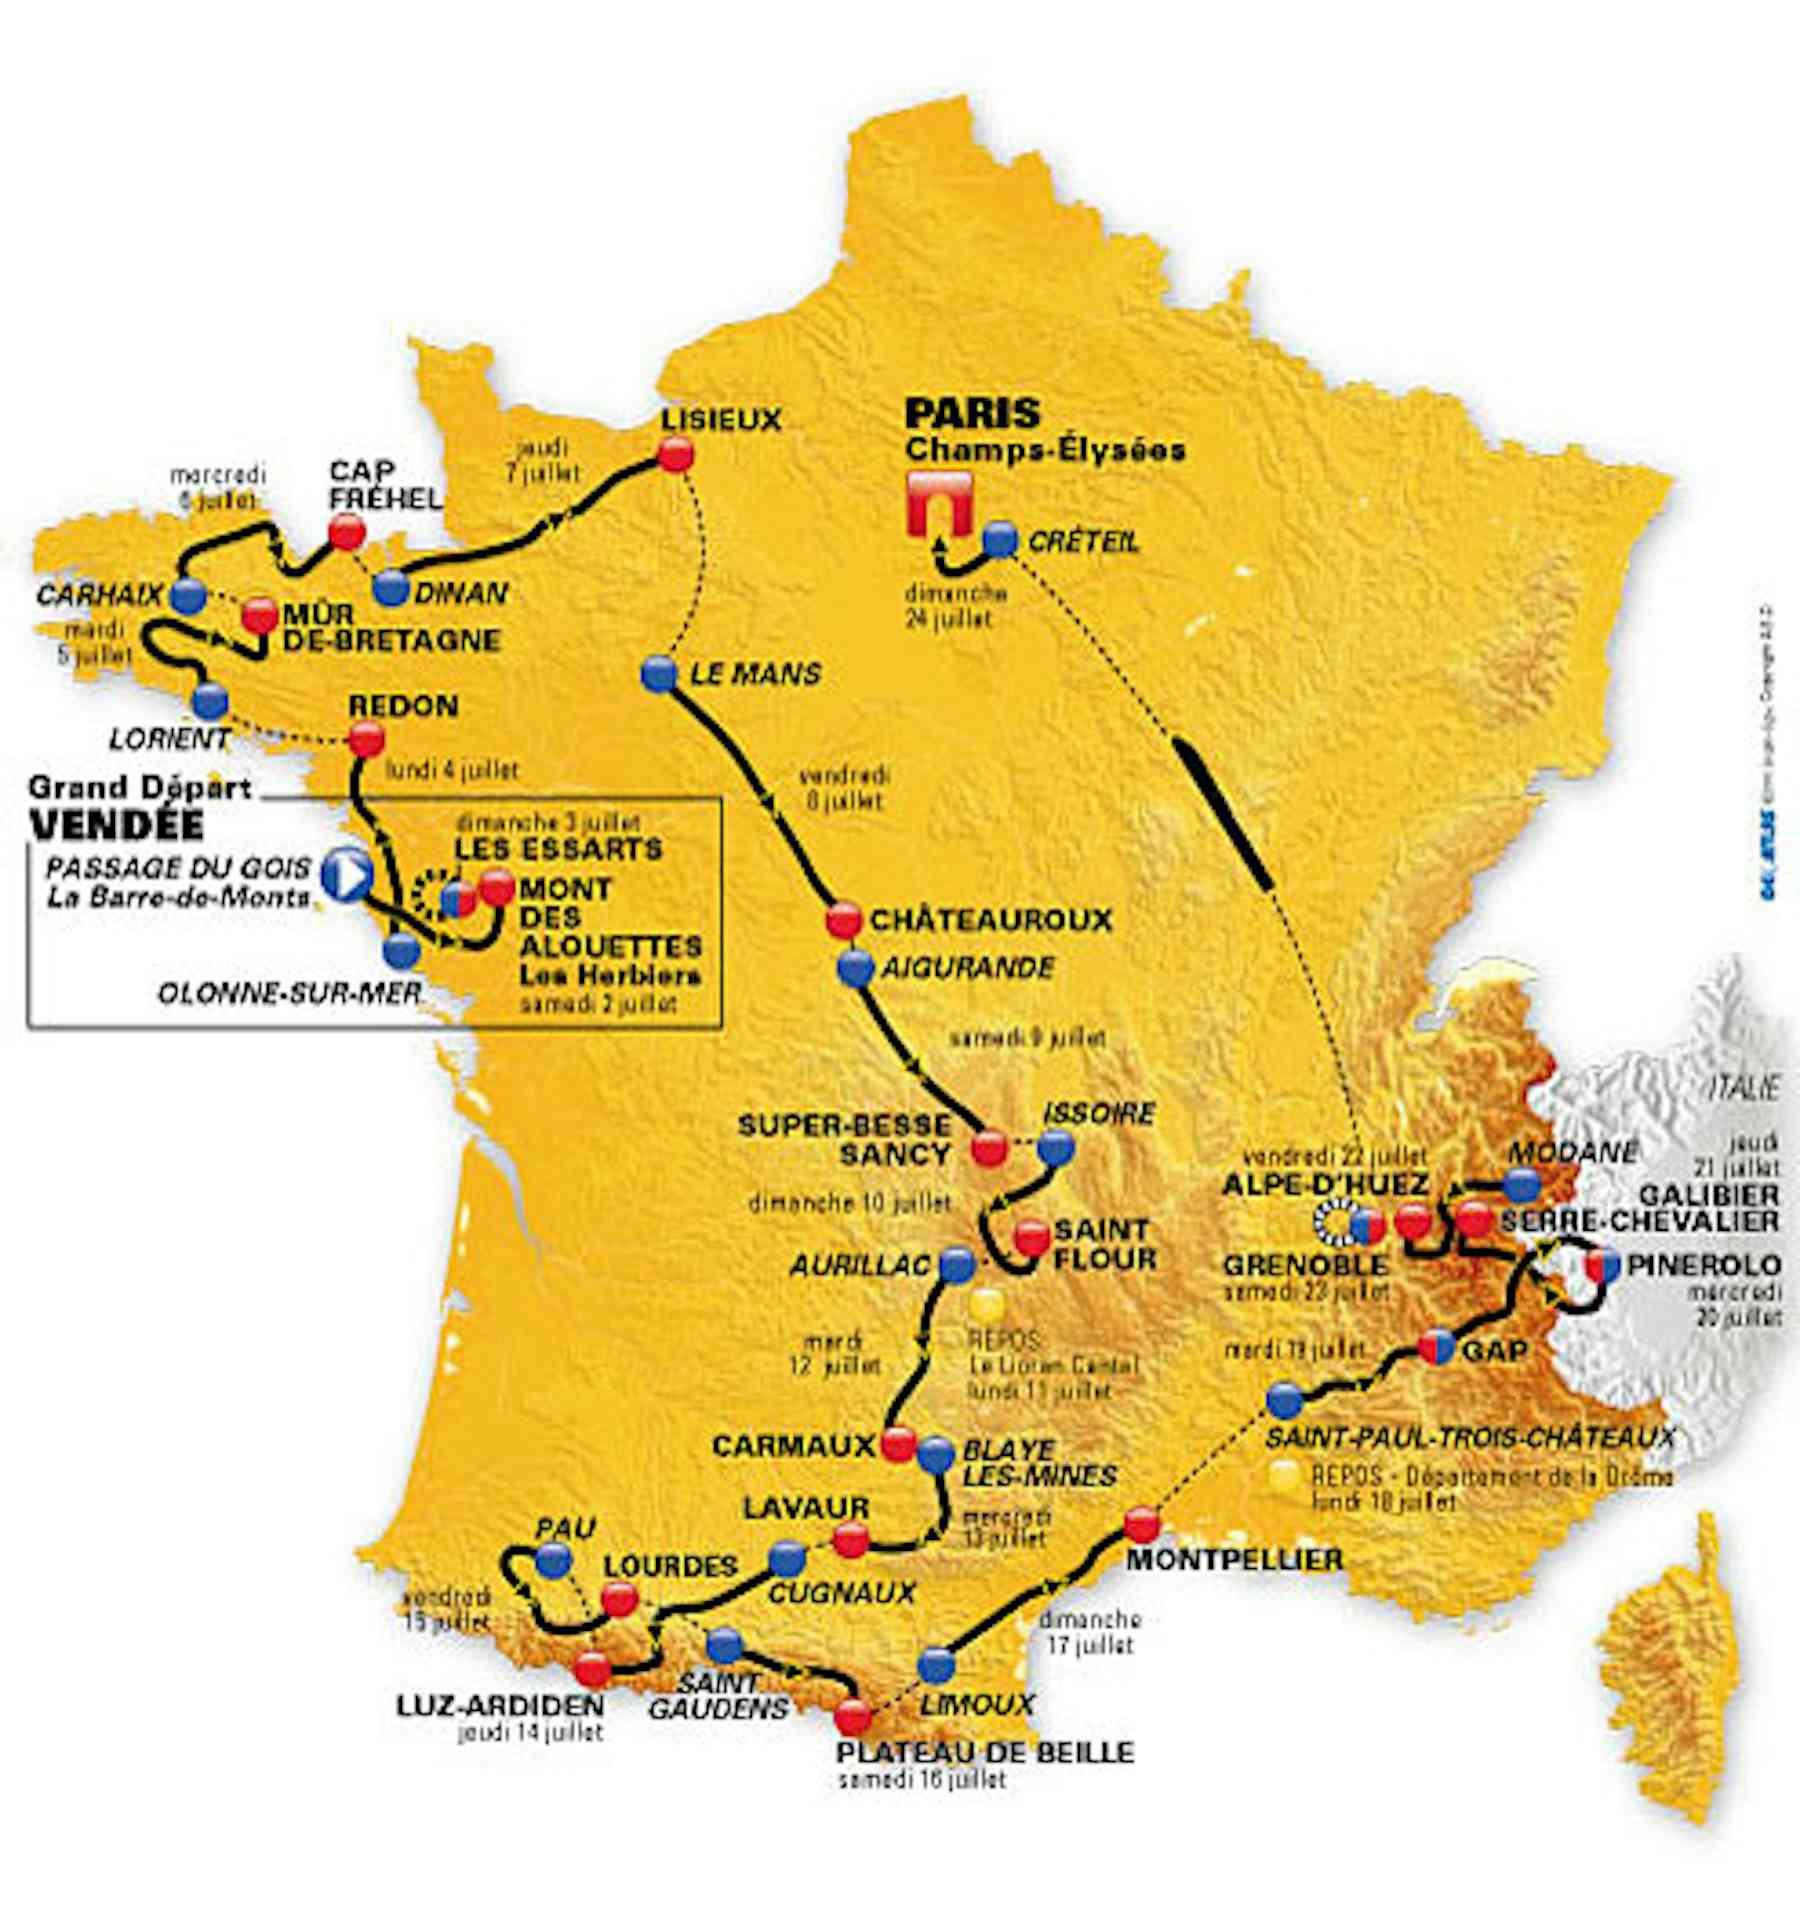 The science of elite cycling Tour de France (stages 1 to 11)